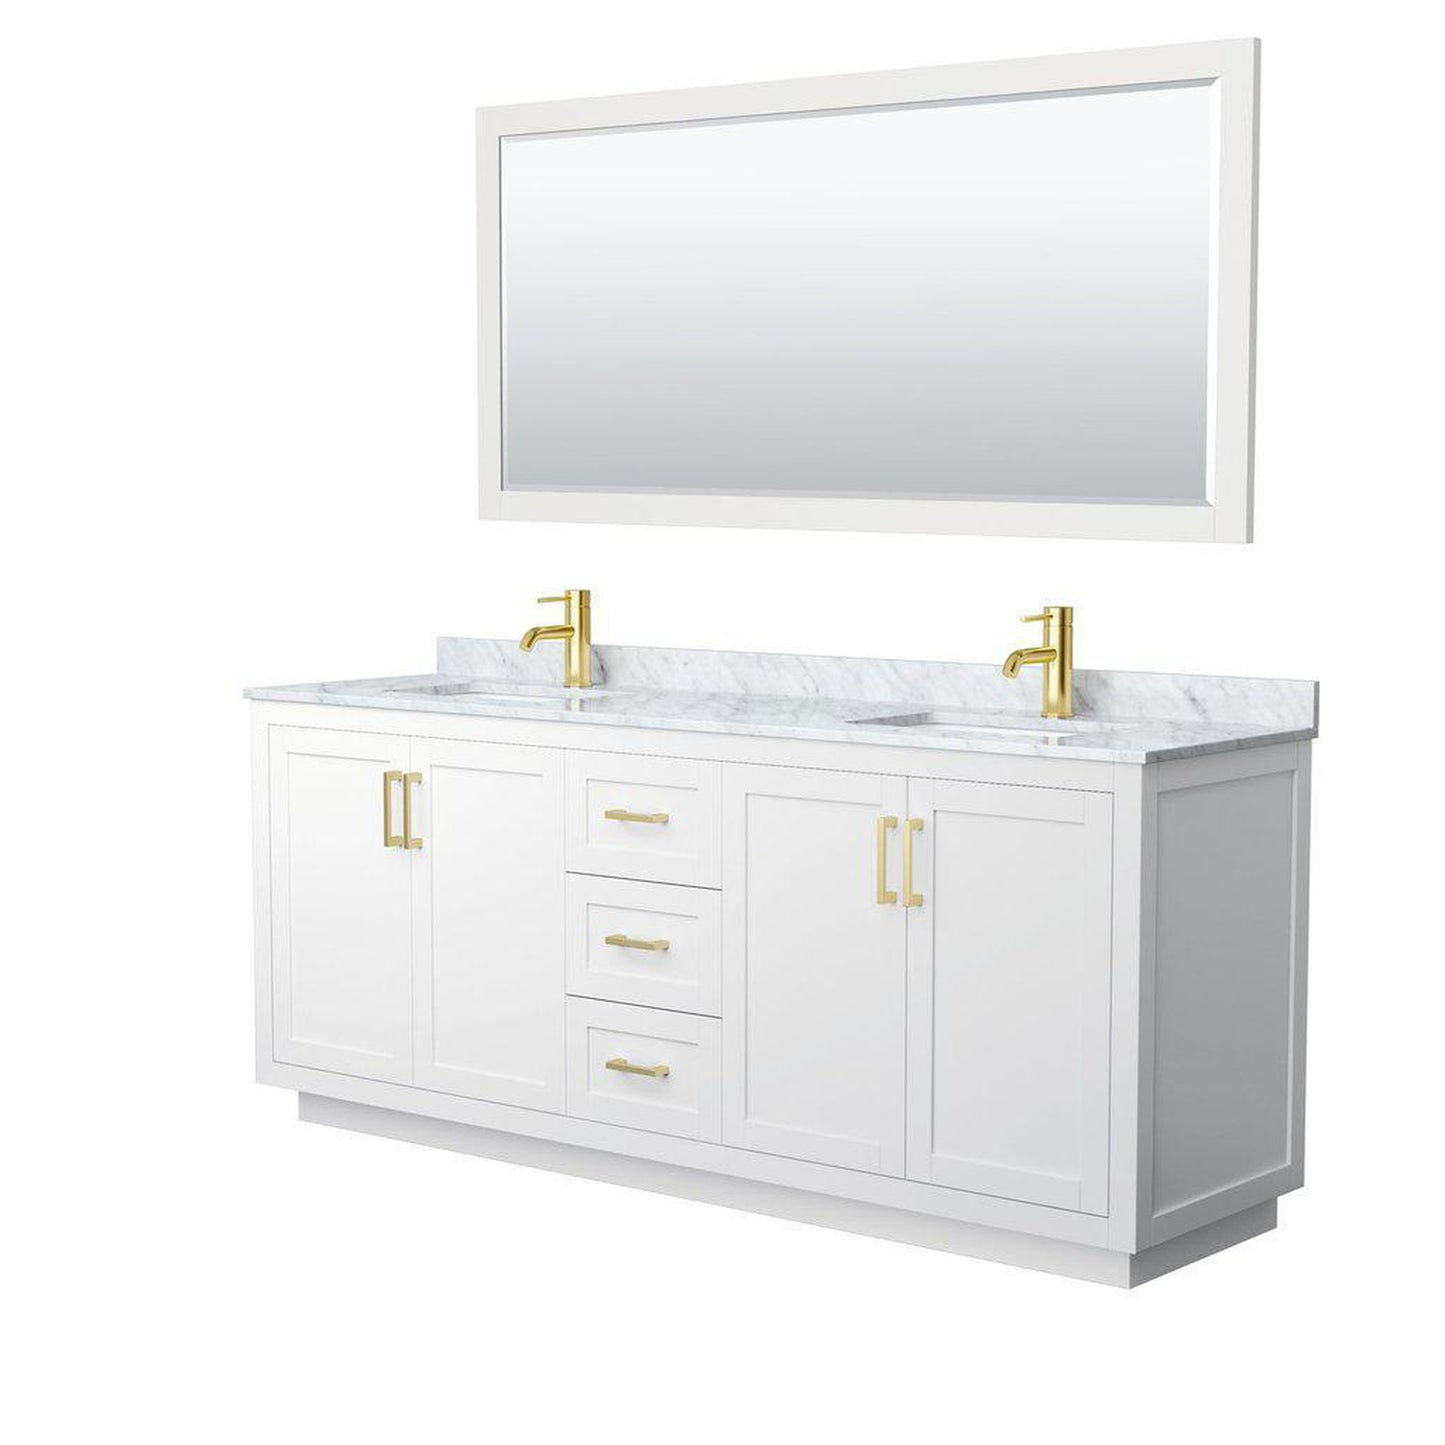 Wyndham Collection Miranda 80" Double Bathroom White Vanity Set With White Carrara Marble Countertop, Undermount Square Sink, 70" Mirror And Brushed Gold Trim